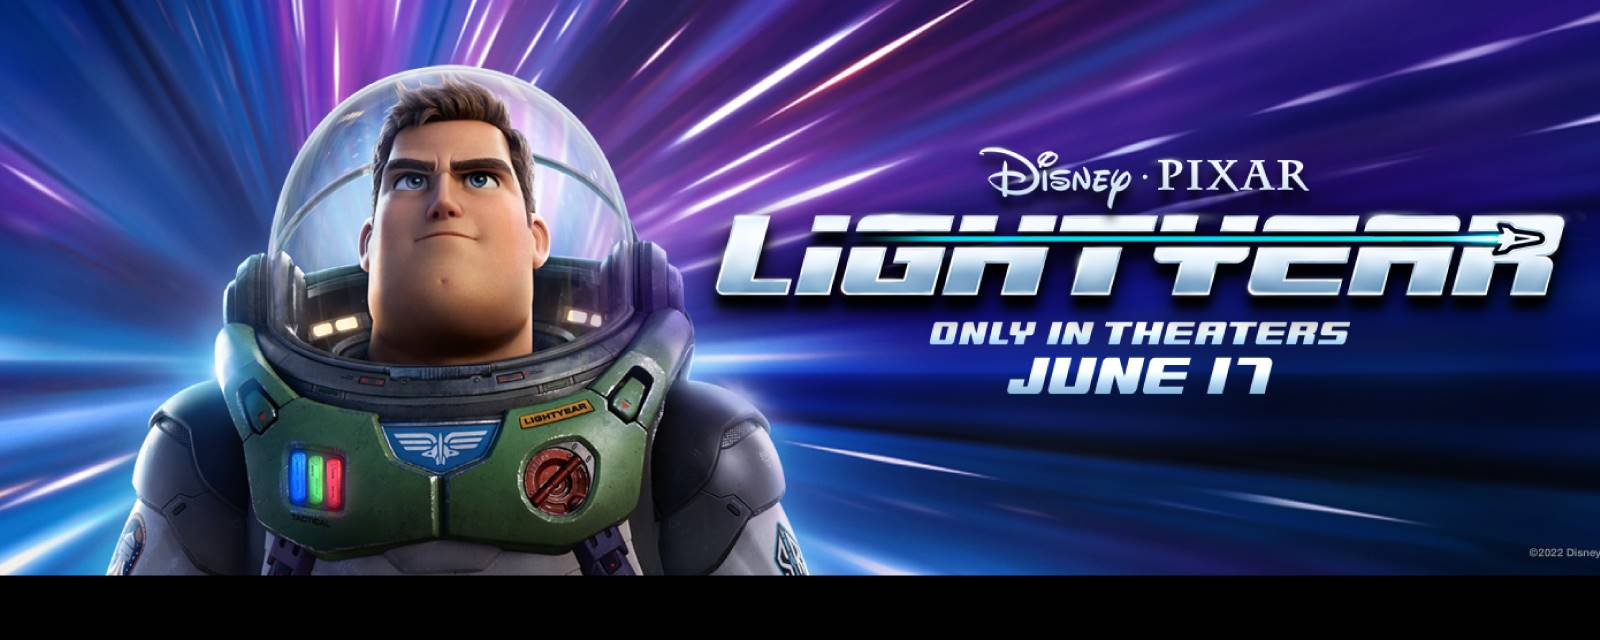 Lightyear Early Access Screening: The Andy Experience